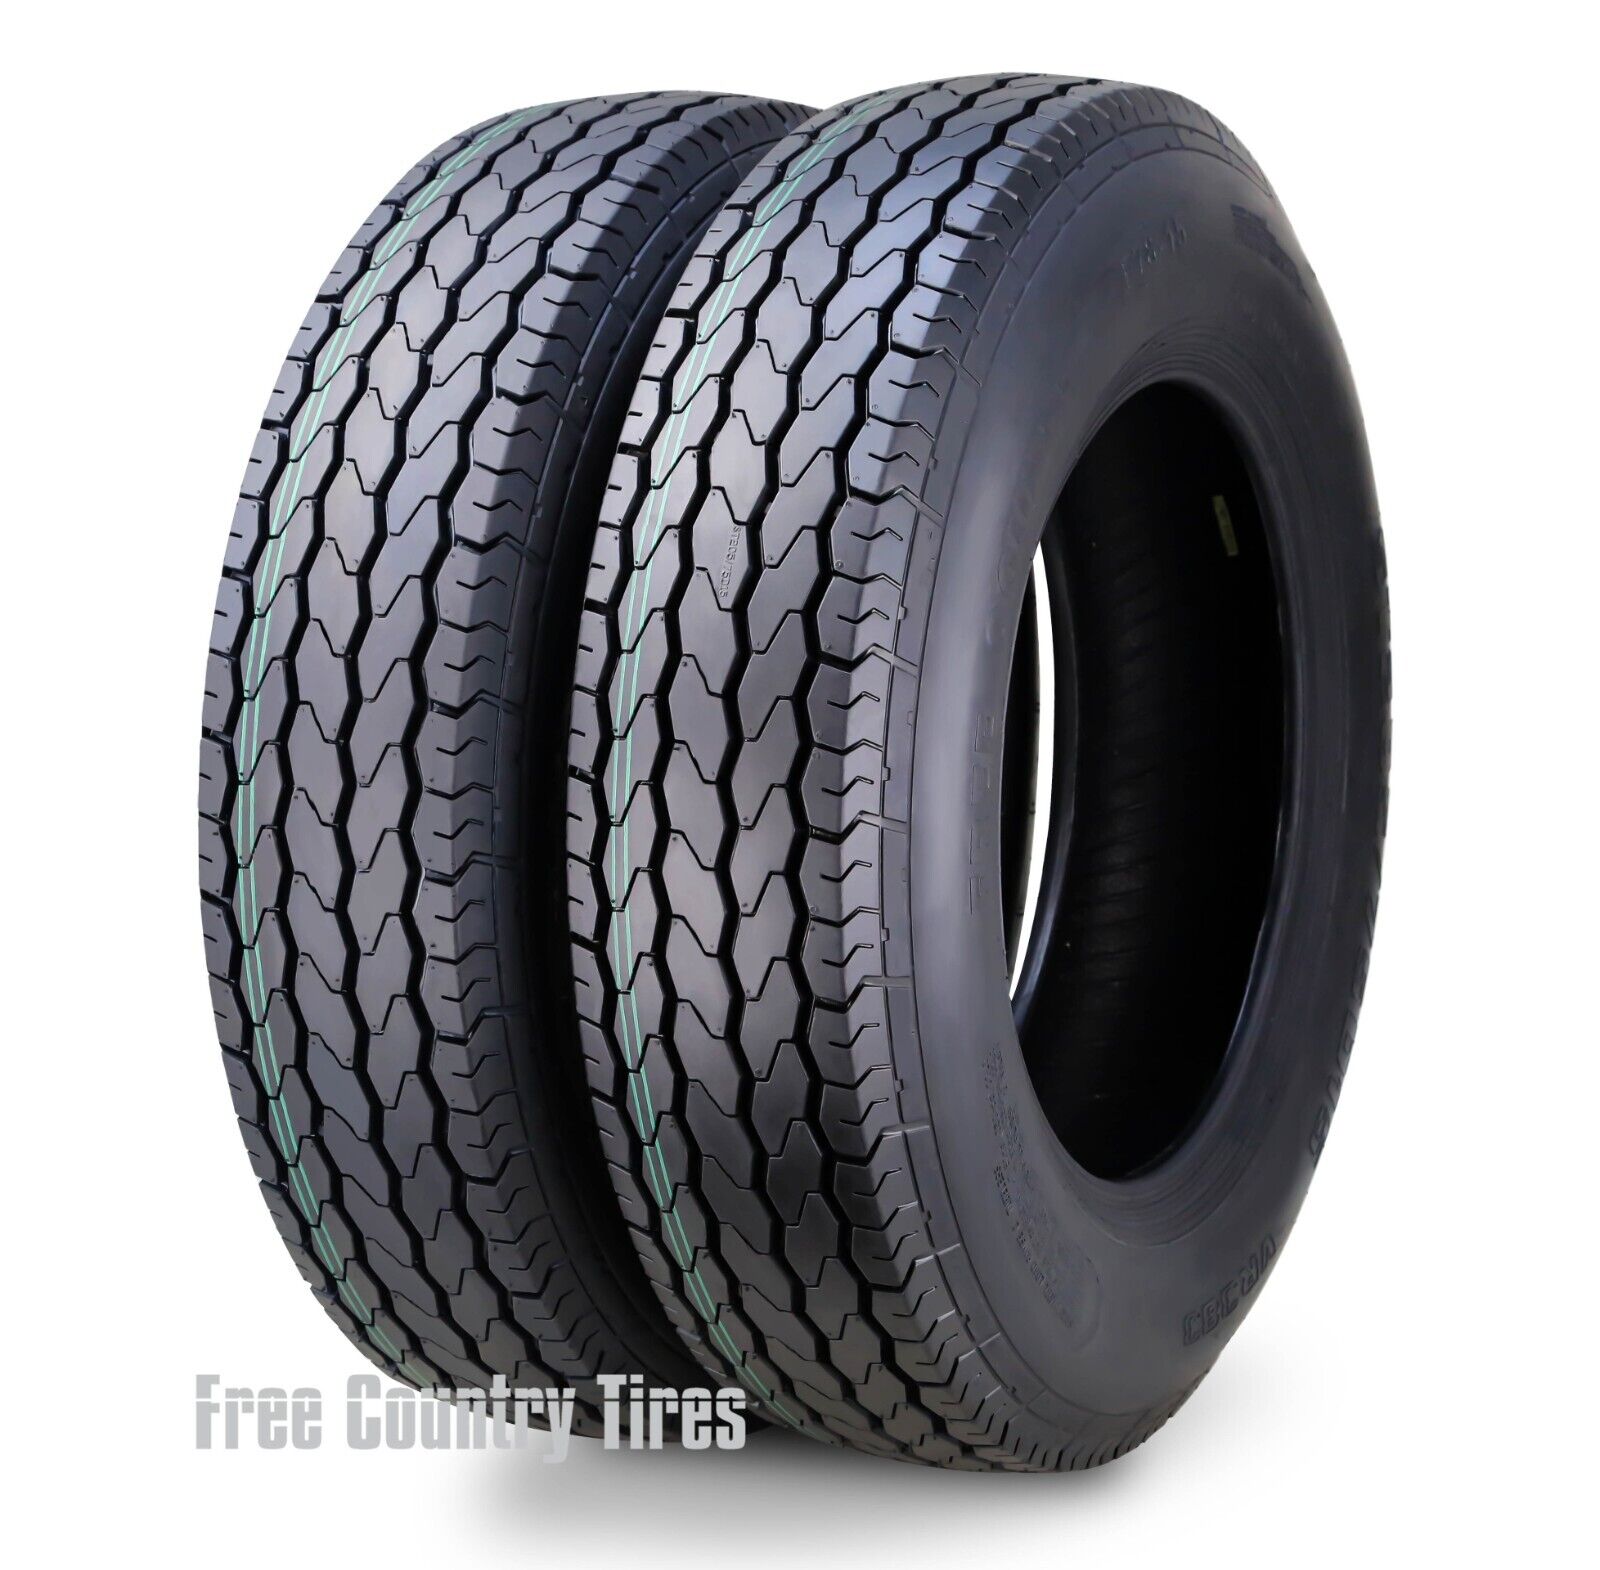 Set 2 Trailer Tires ST205/75D15 205 75 15 F78-15 Free Country LRC 6 Ply 101L